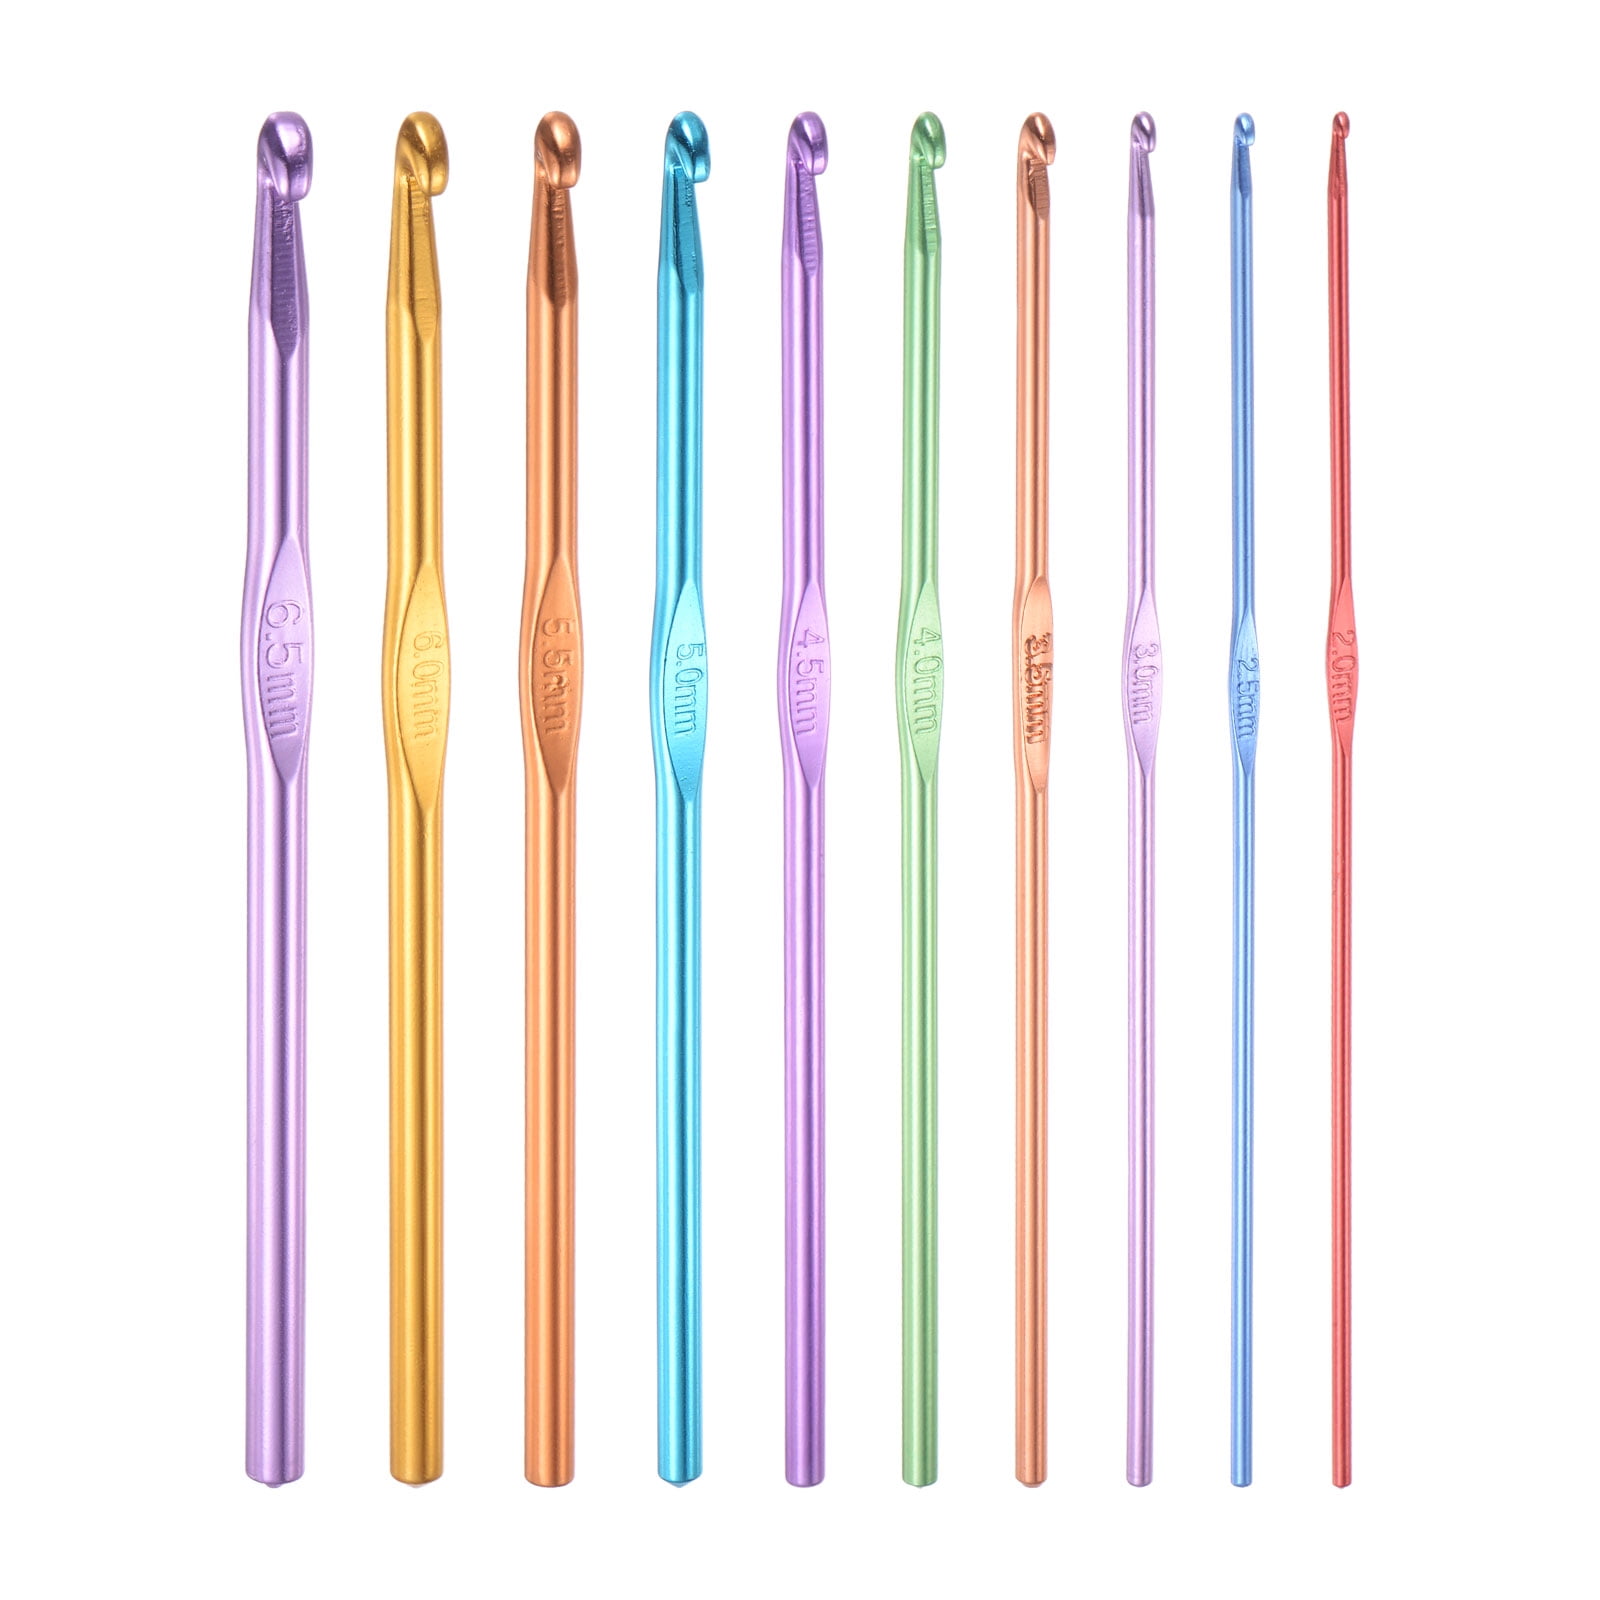 Dating Steel Crochet Needles and Hooks – Center for Knit and Crochet